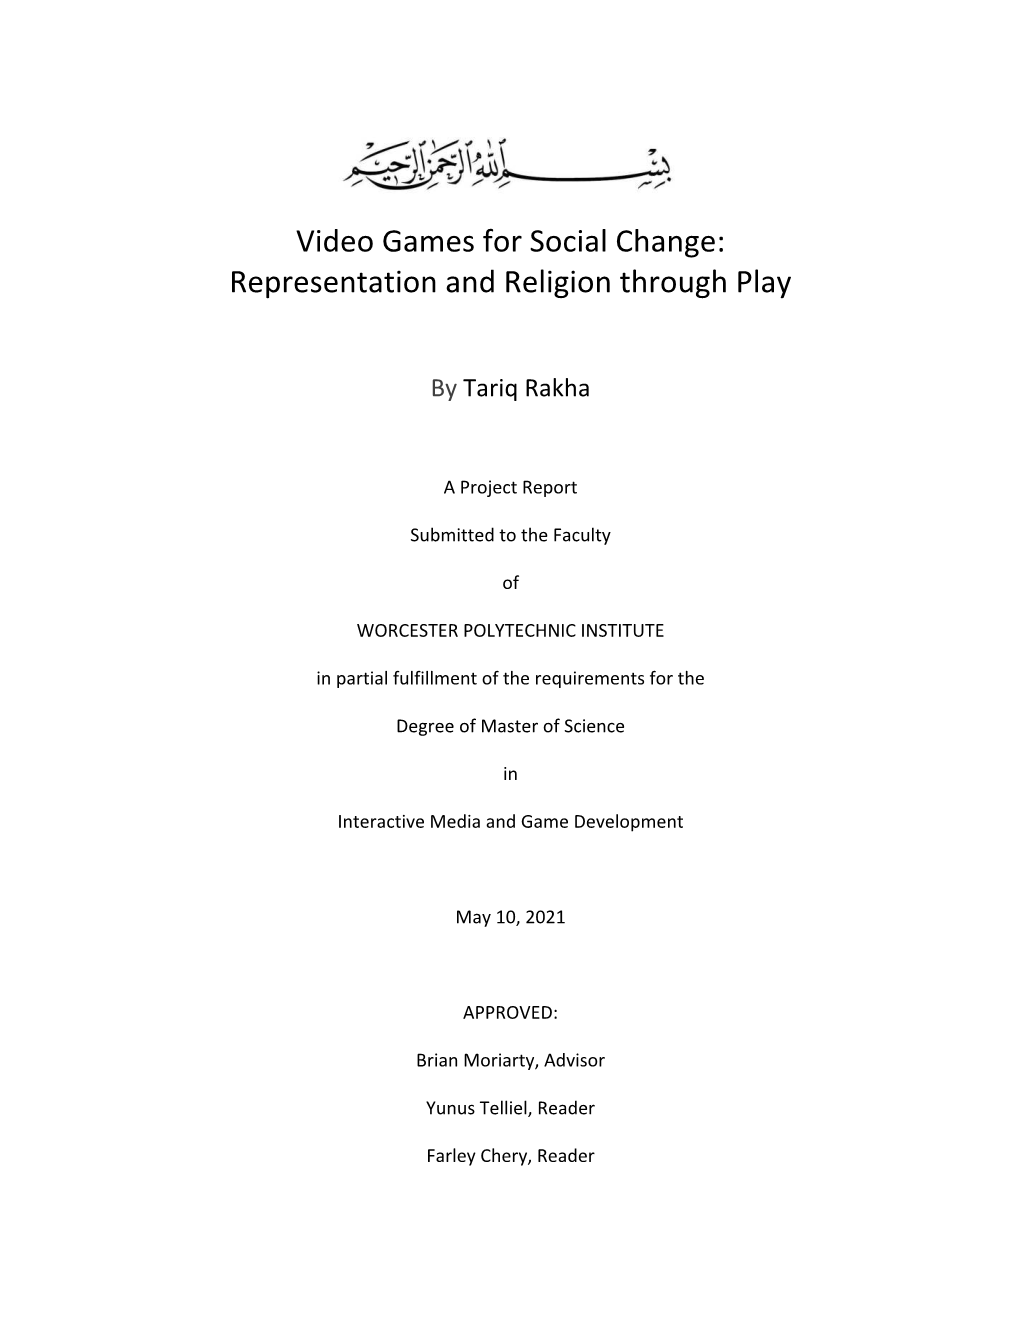 Video Games for Social Change: Representation and Religion Through Play